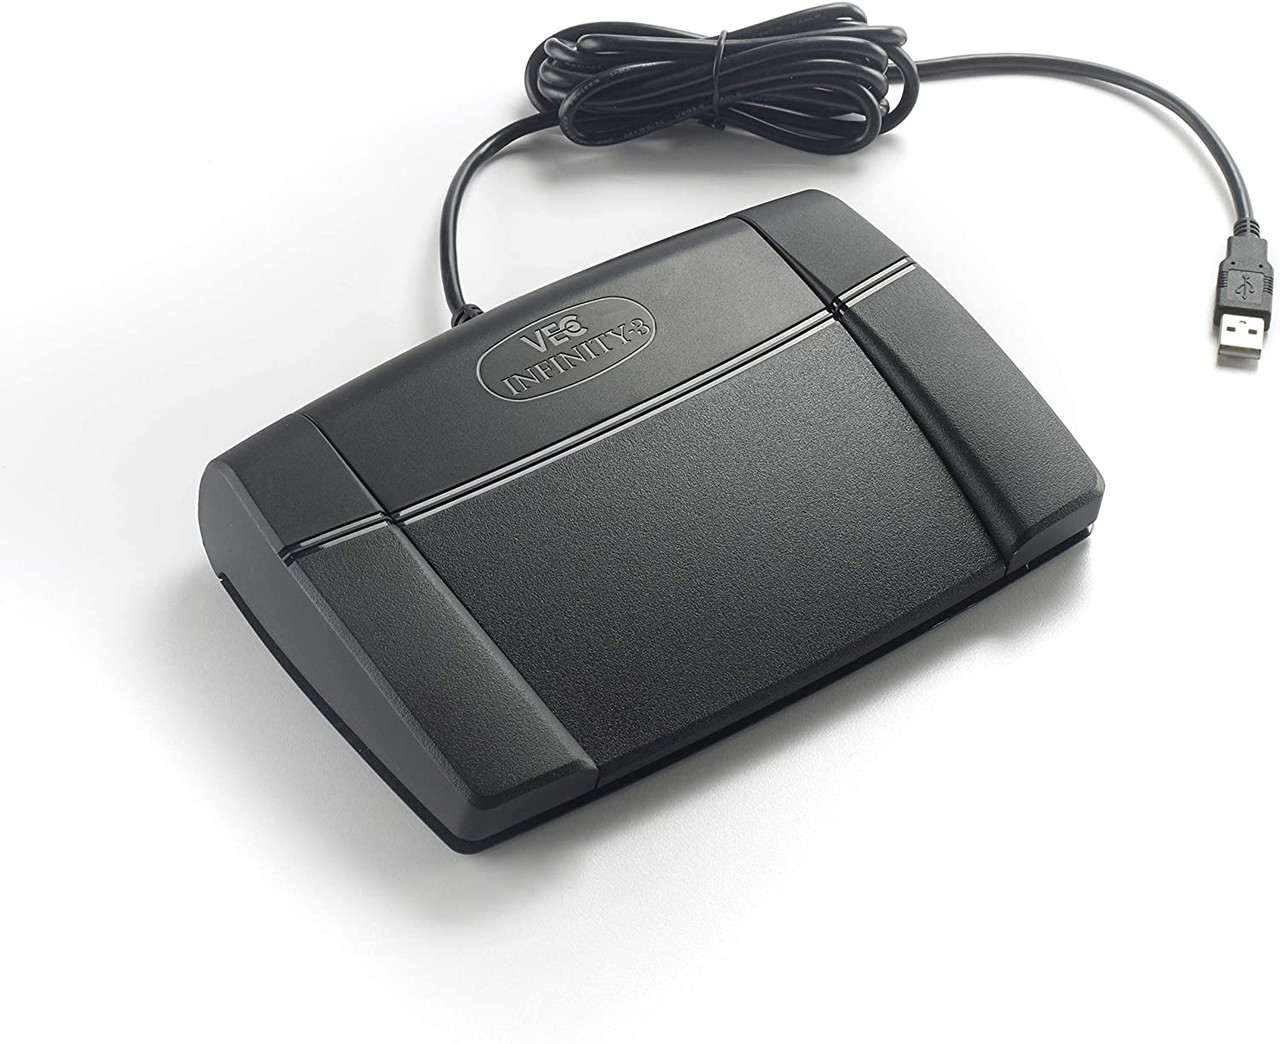 Infinity IN-USB-3 Universal Foot Pedal